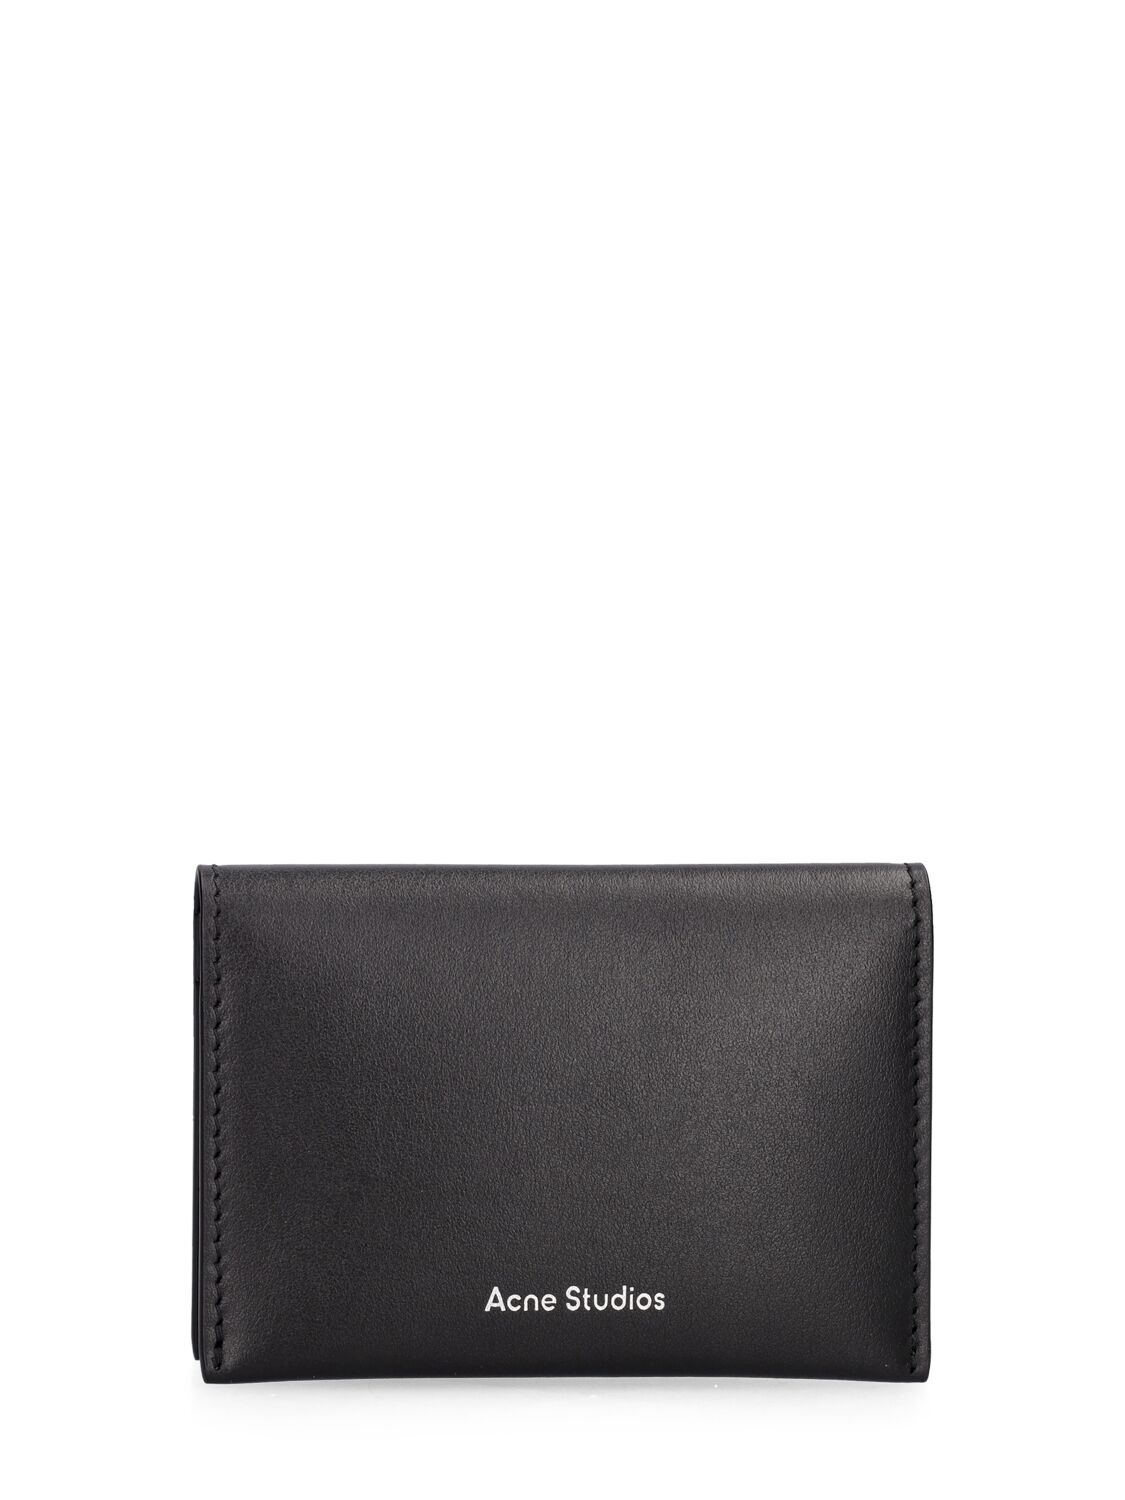 Acne Studios Flap Leather Card Holder In Black